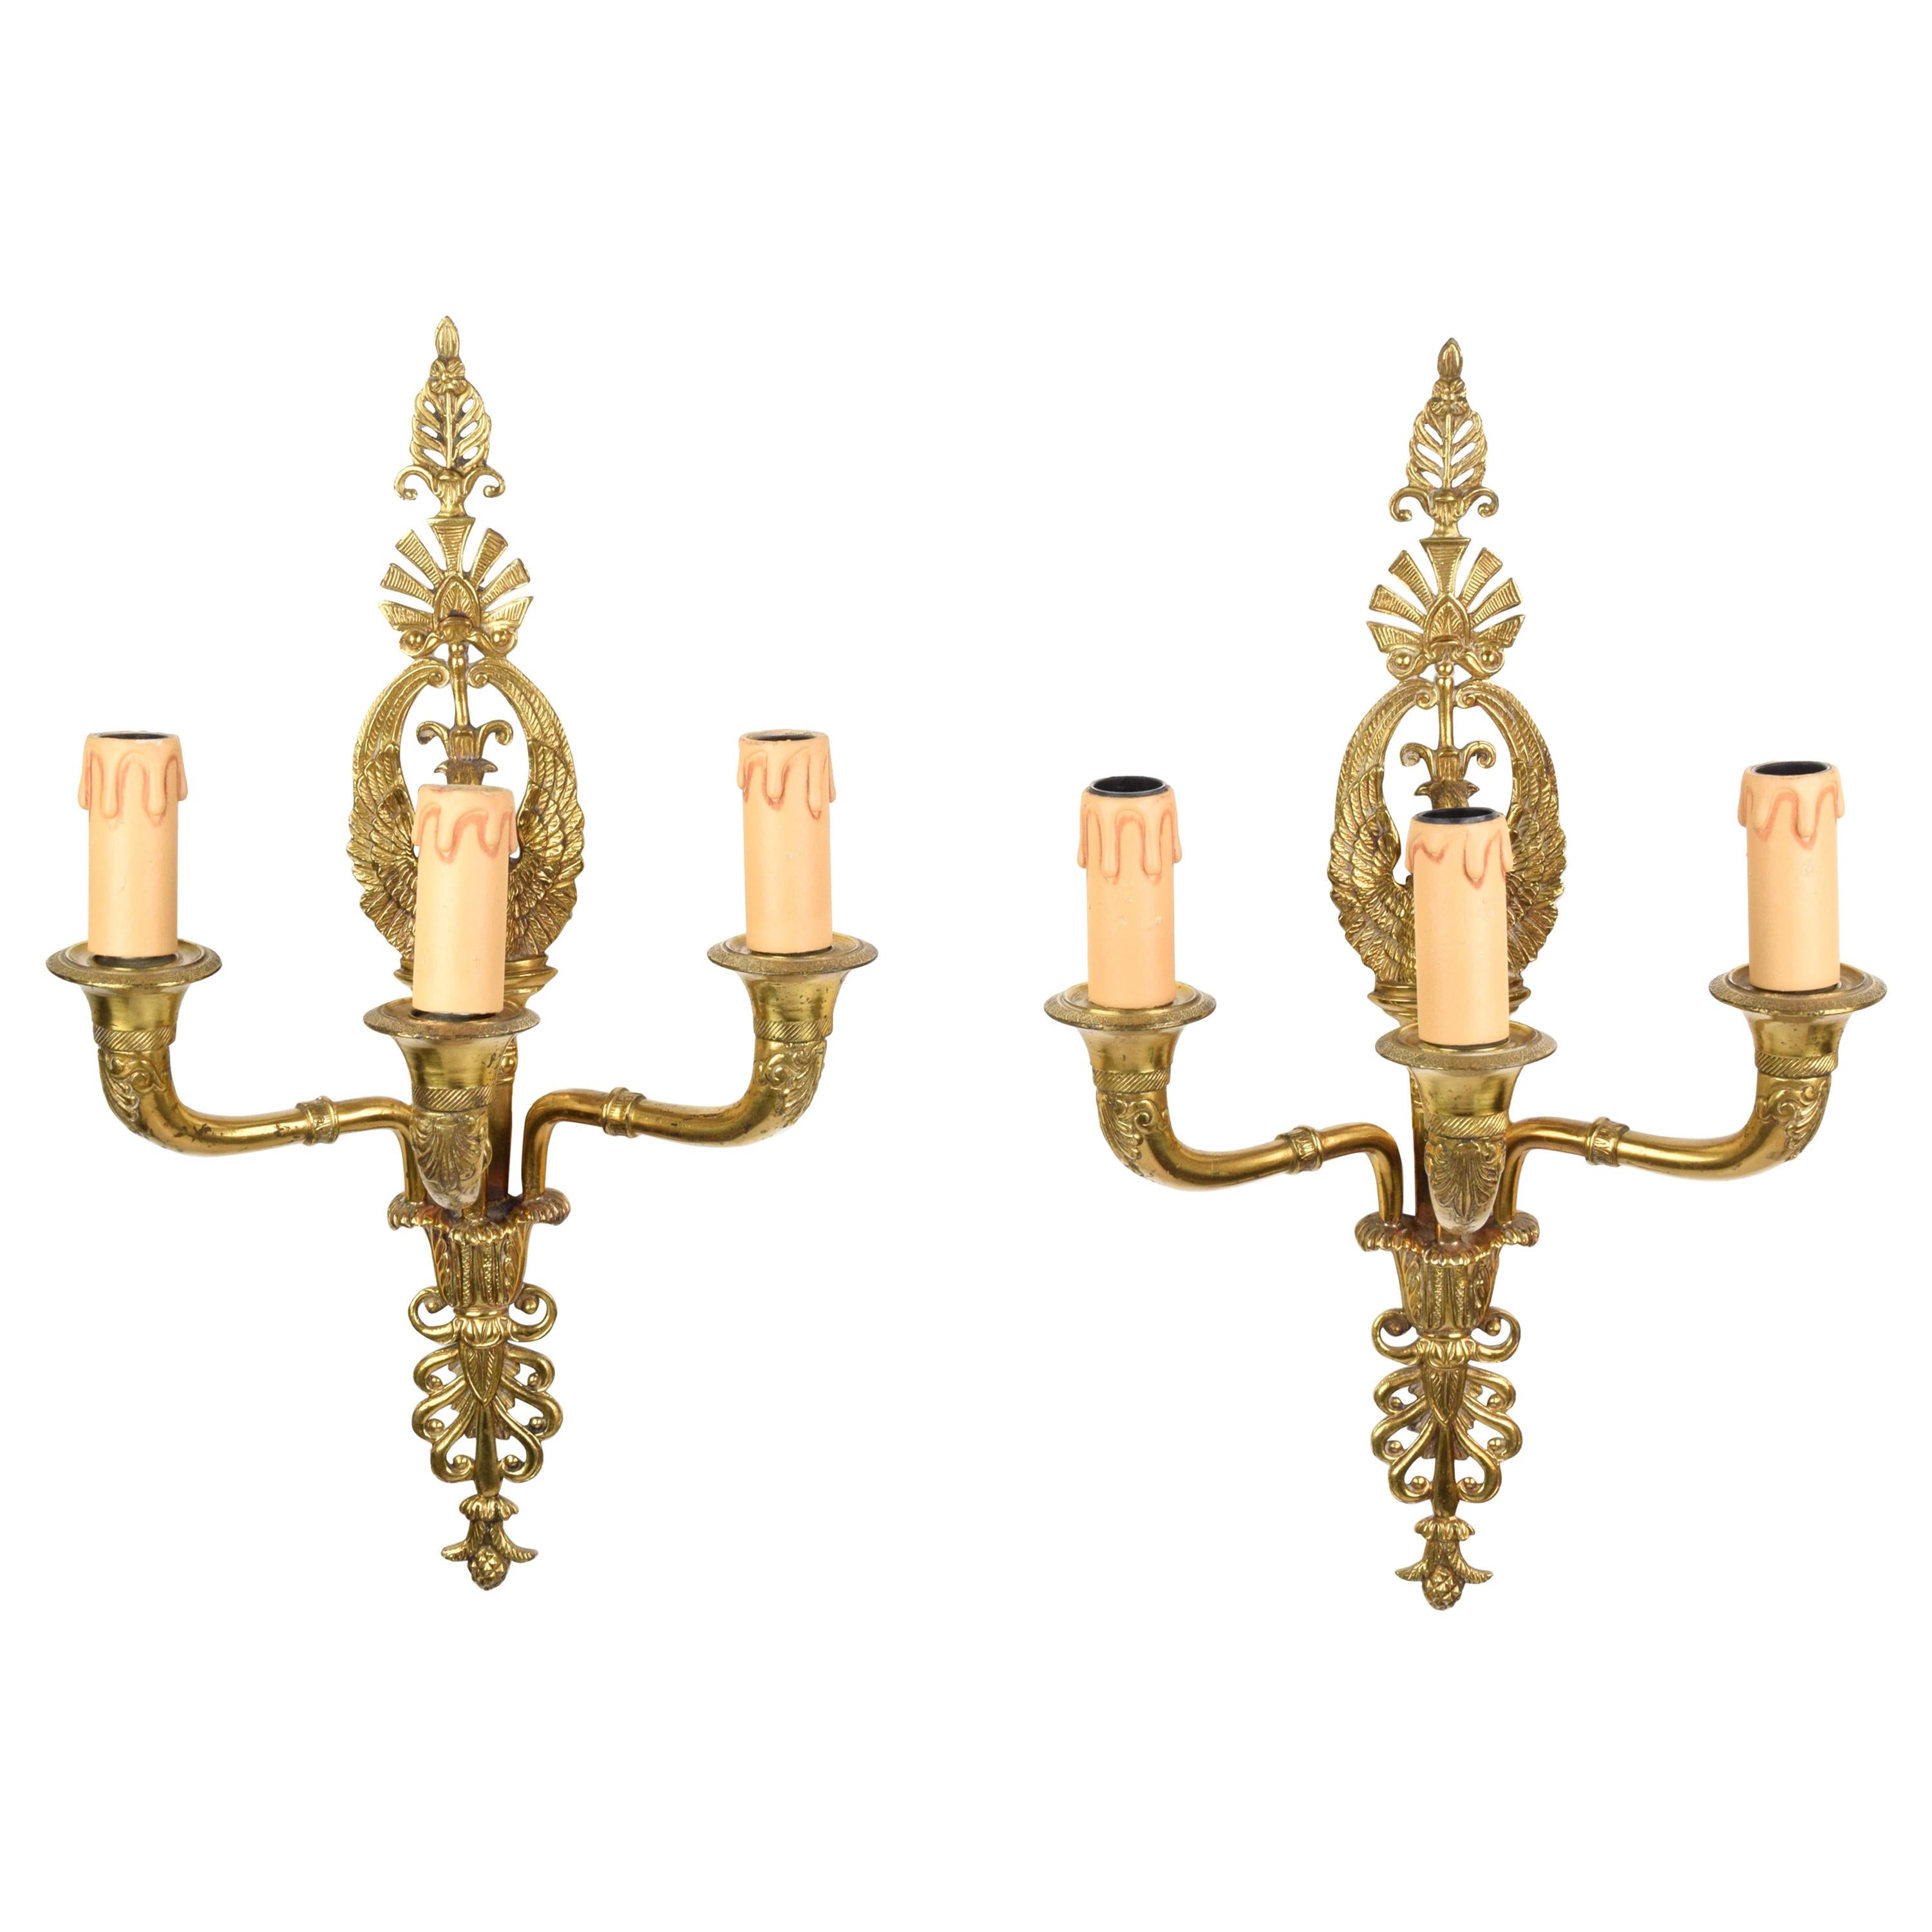 Pair of Empire Sconces in Gilded Bronze with Three Lights, Early 20th Century For Sale